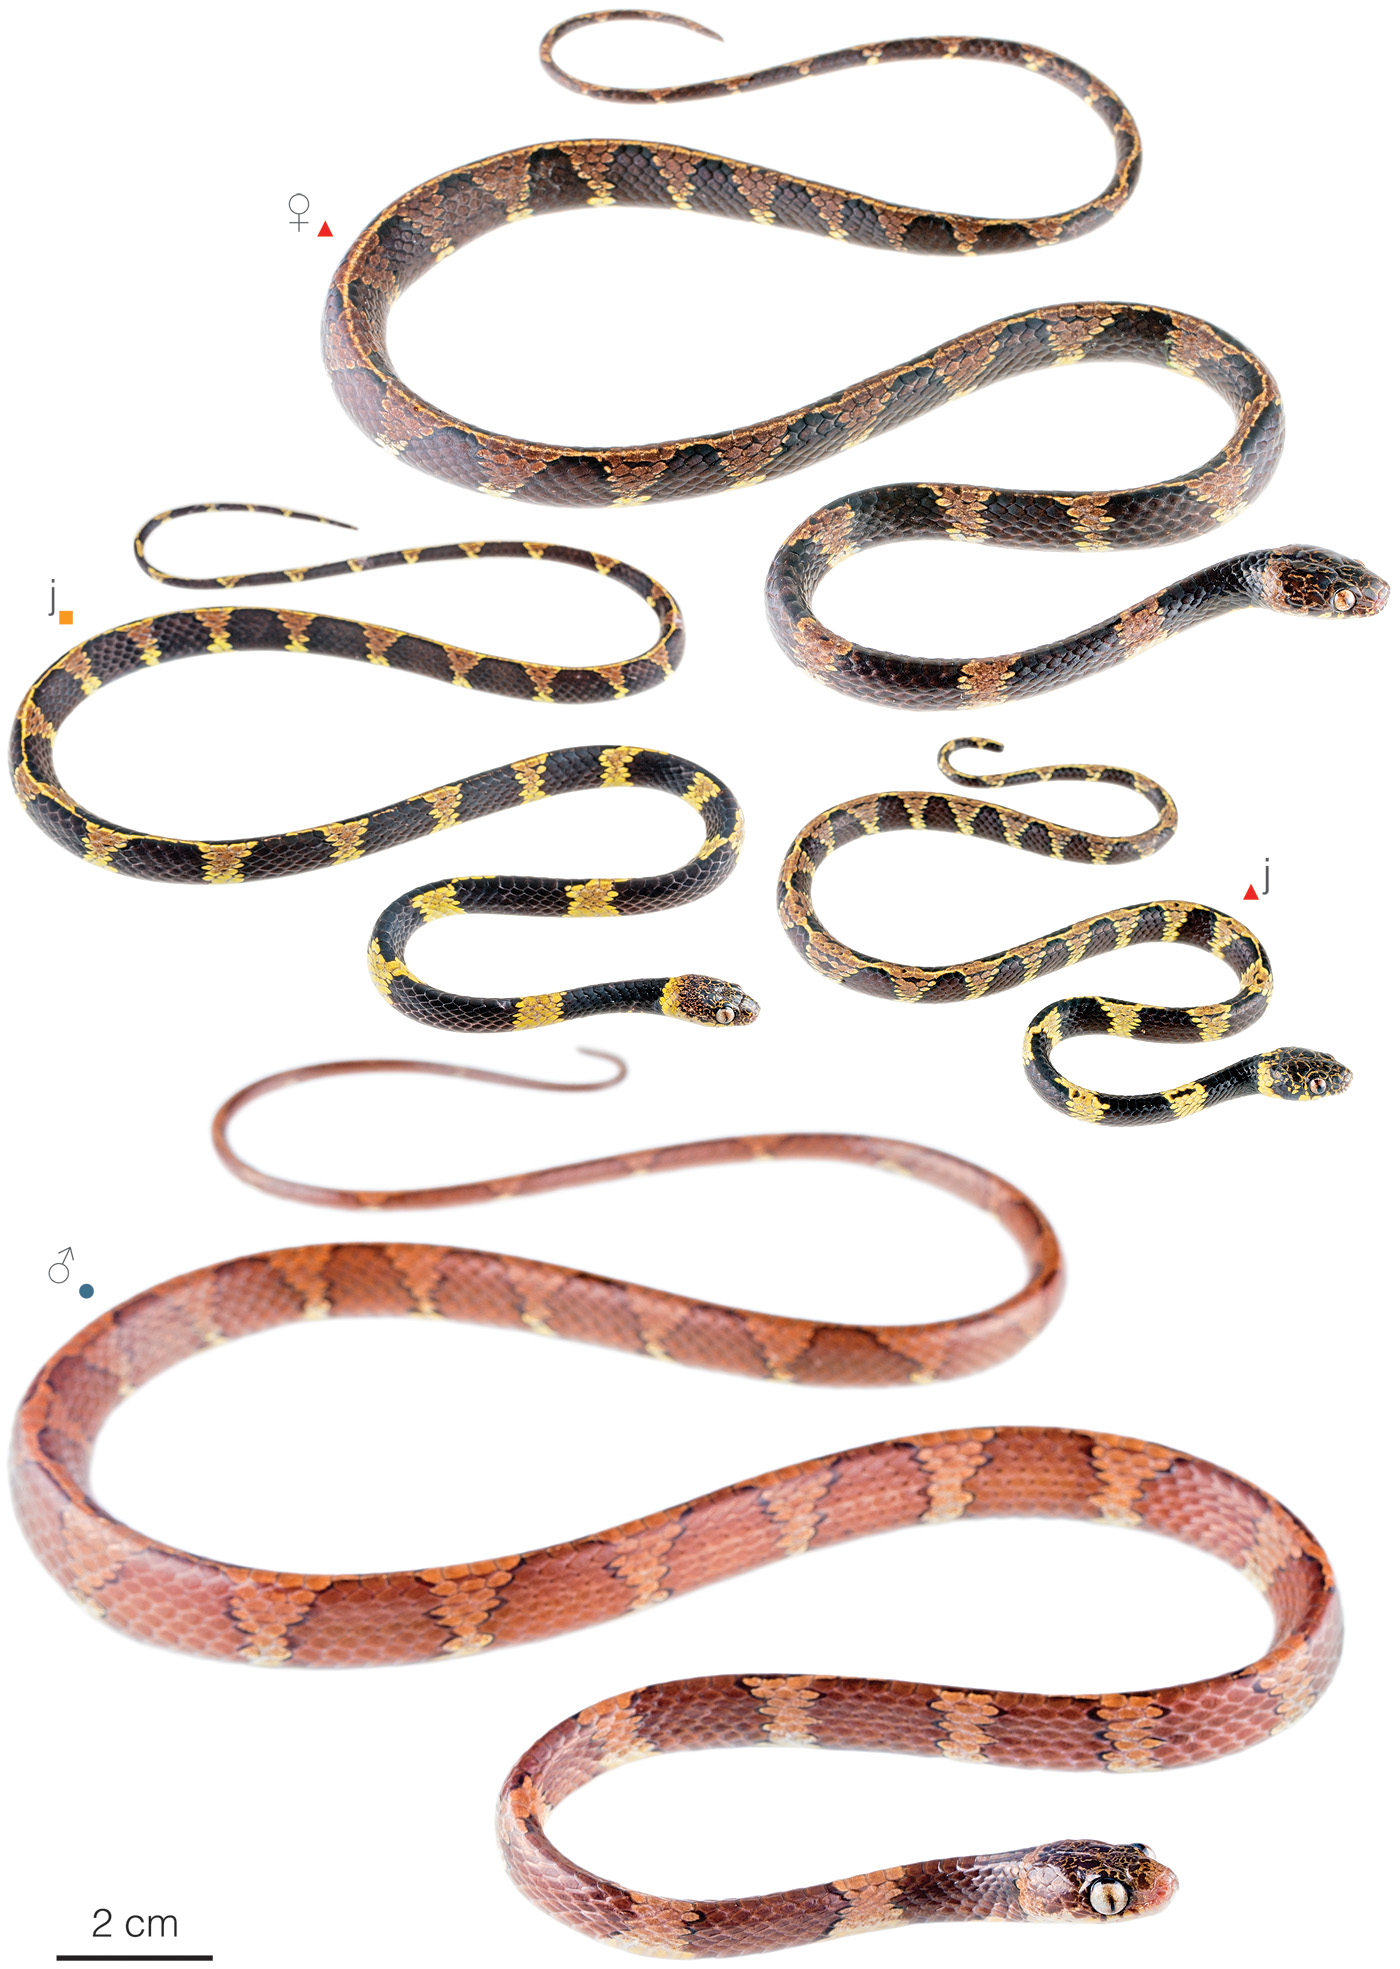 Figure showing variation among individuals of Dipsas vermiculata